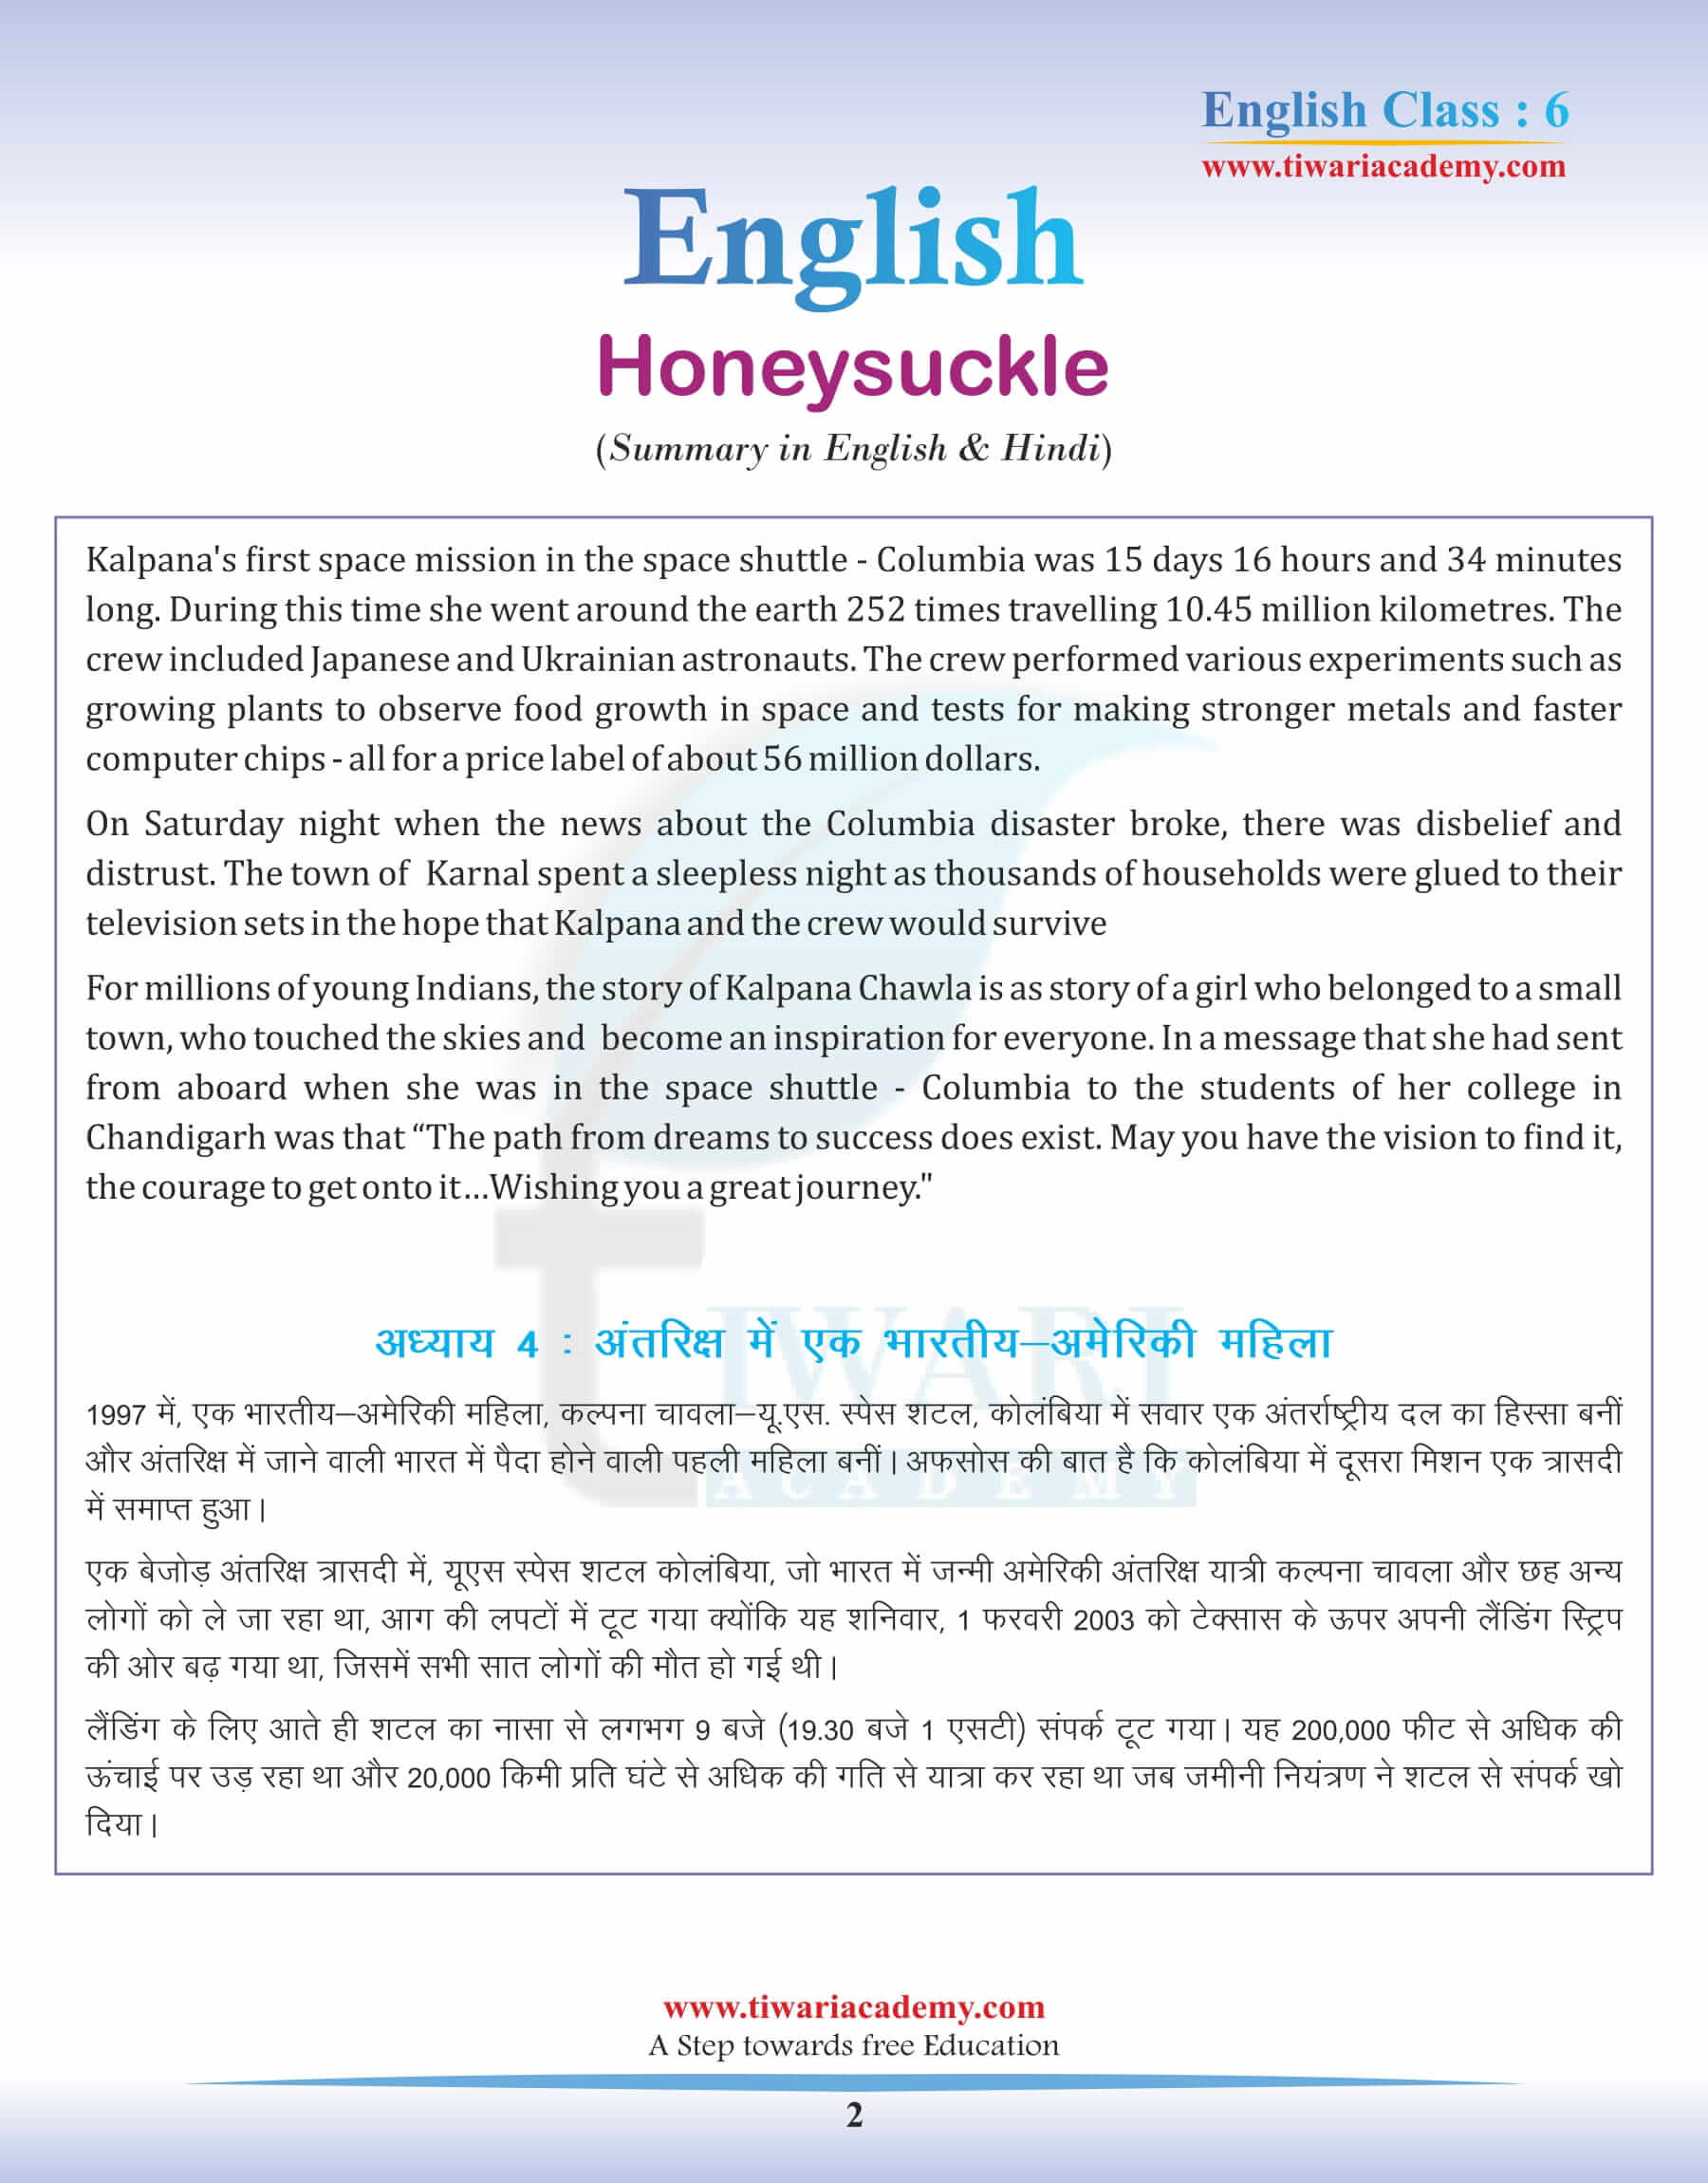 Class 6 English Chapter 4 Summary in Hindi and English